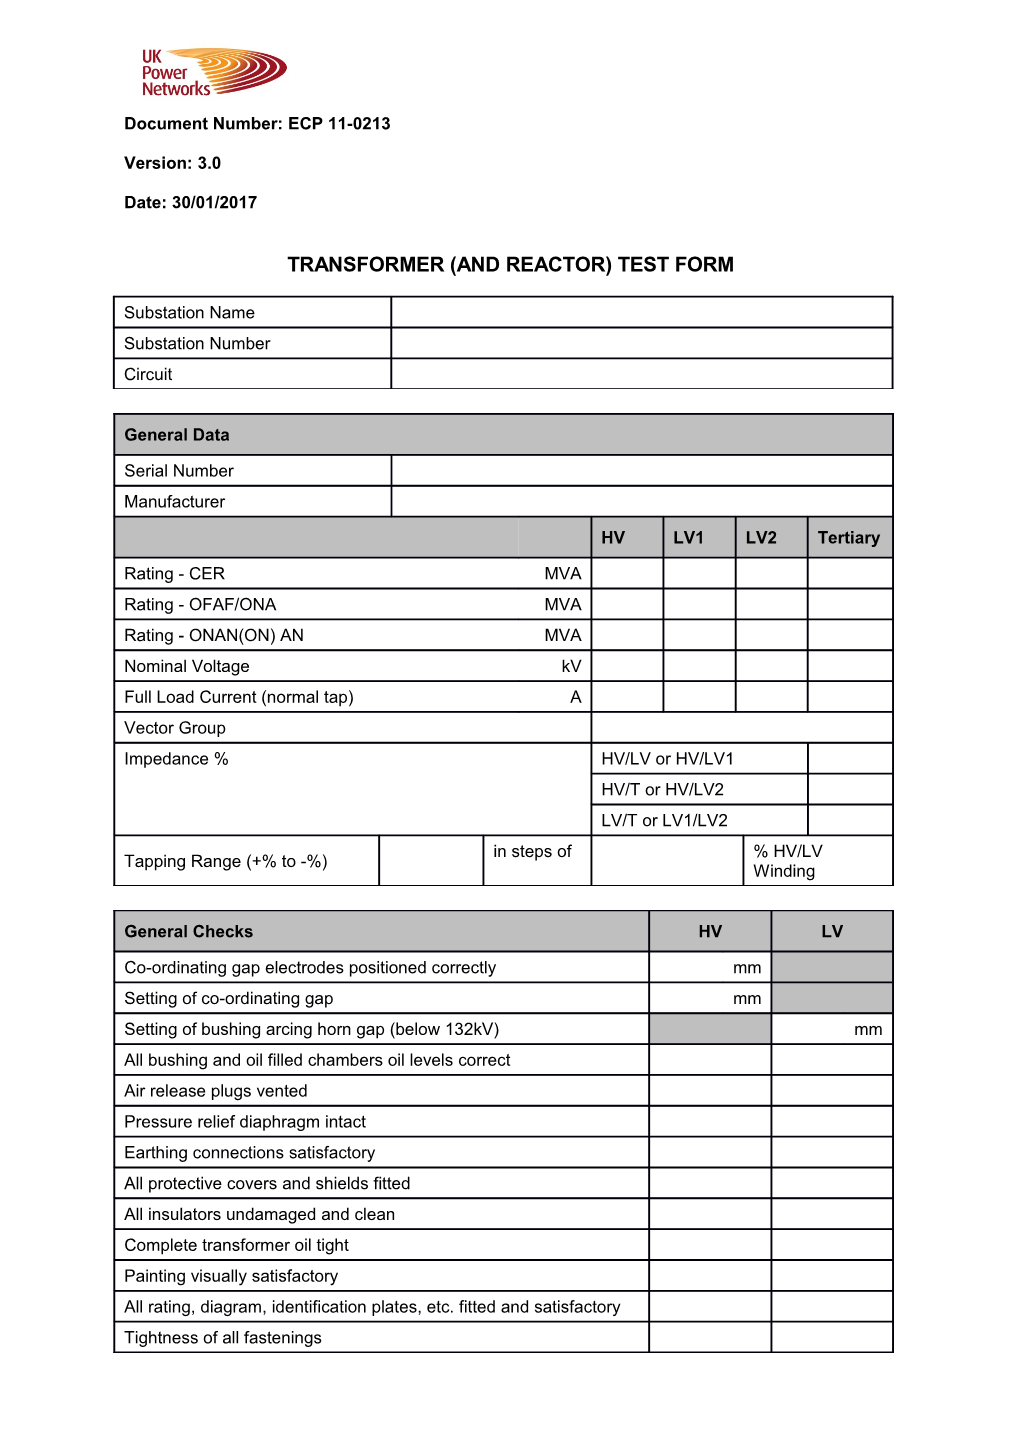 ECP 11-0213 Transformer (And Reactor) Test Form